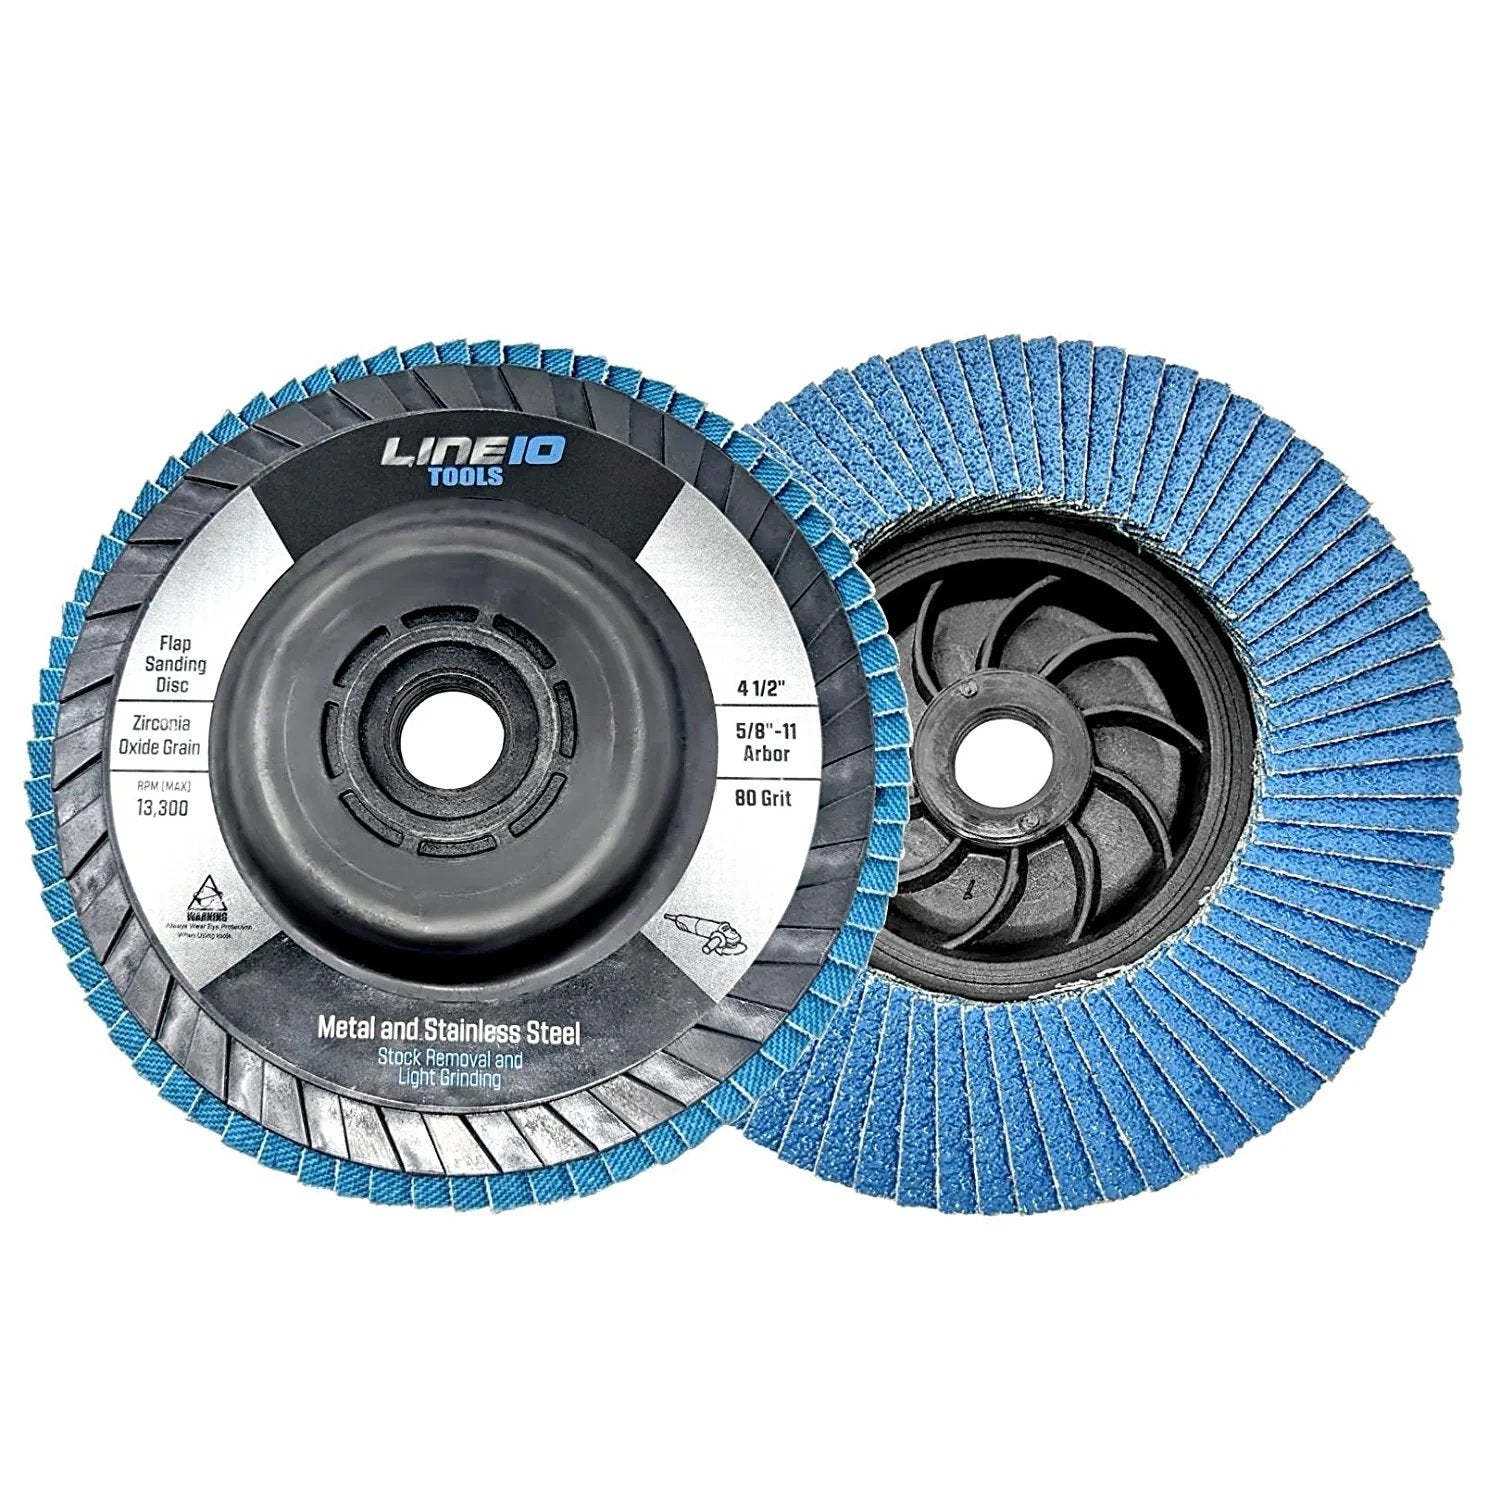 5pk Blue Zirconia Flap Wheel 4-1/2" with 5/8-11 Threaded Arbors for Angle Grinder